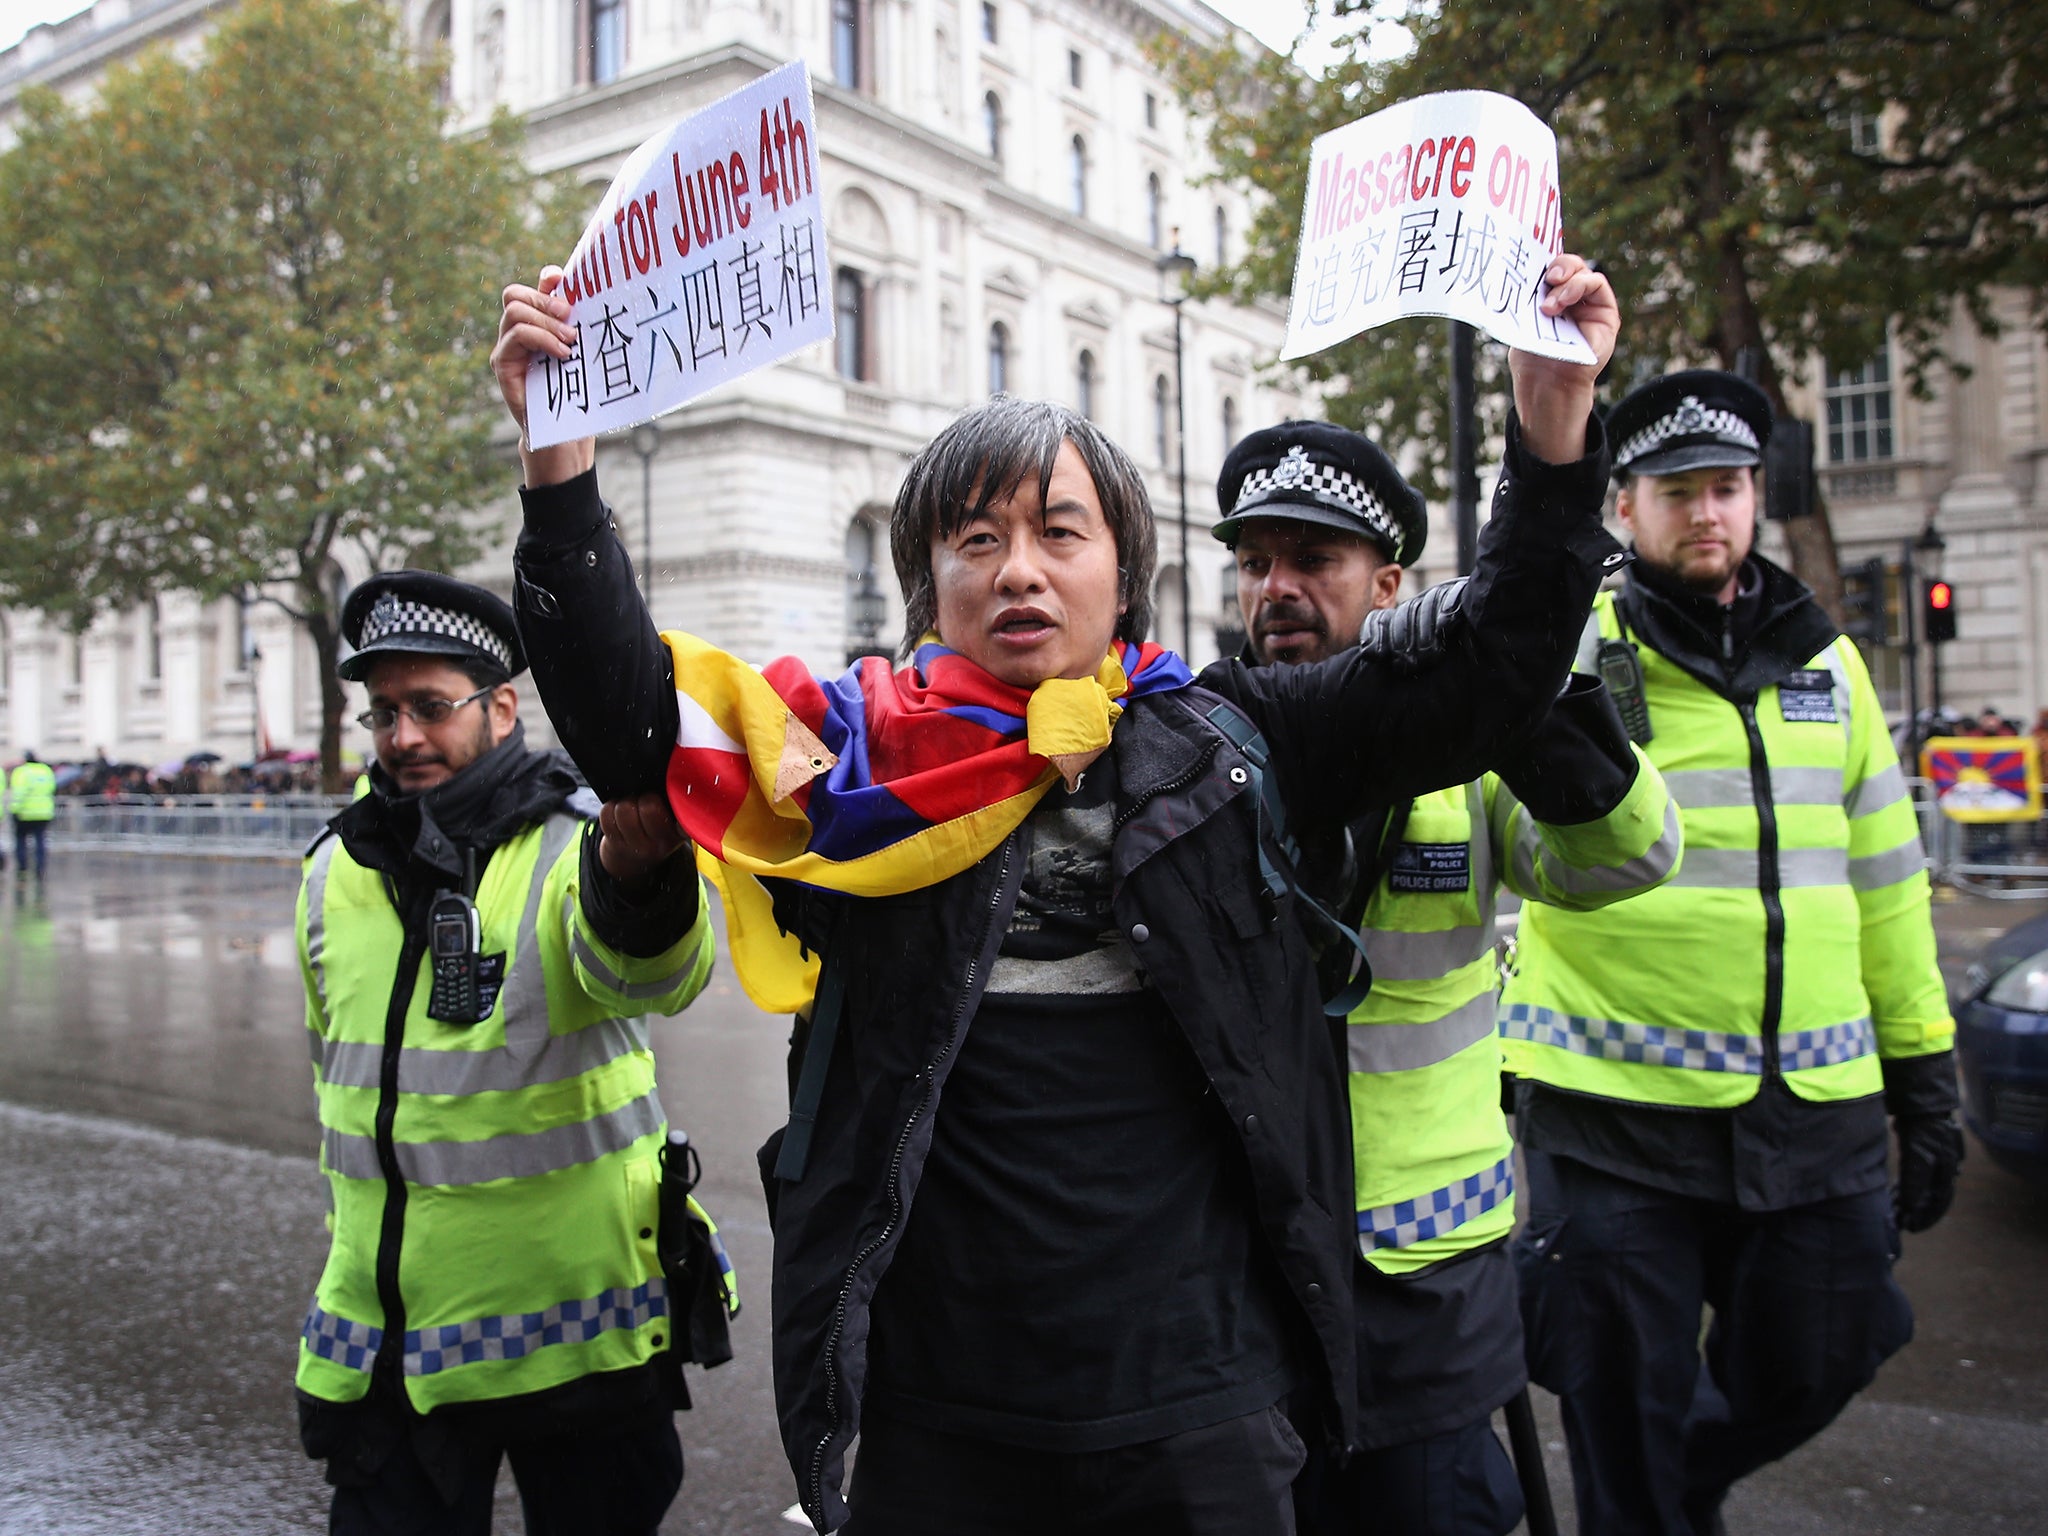 Tiananmen Square survivor Shao Jiang was arrested in the street road for holding up protest banners in Central London